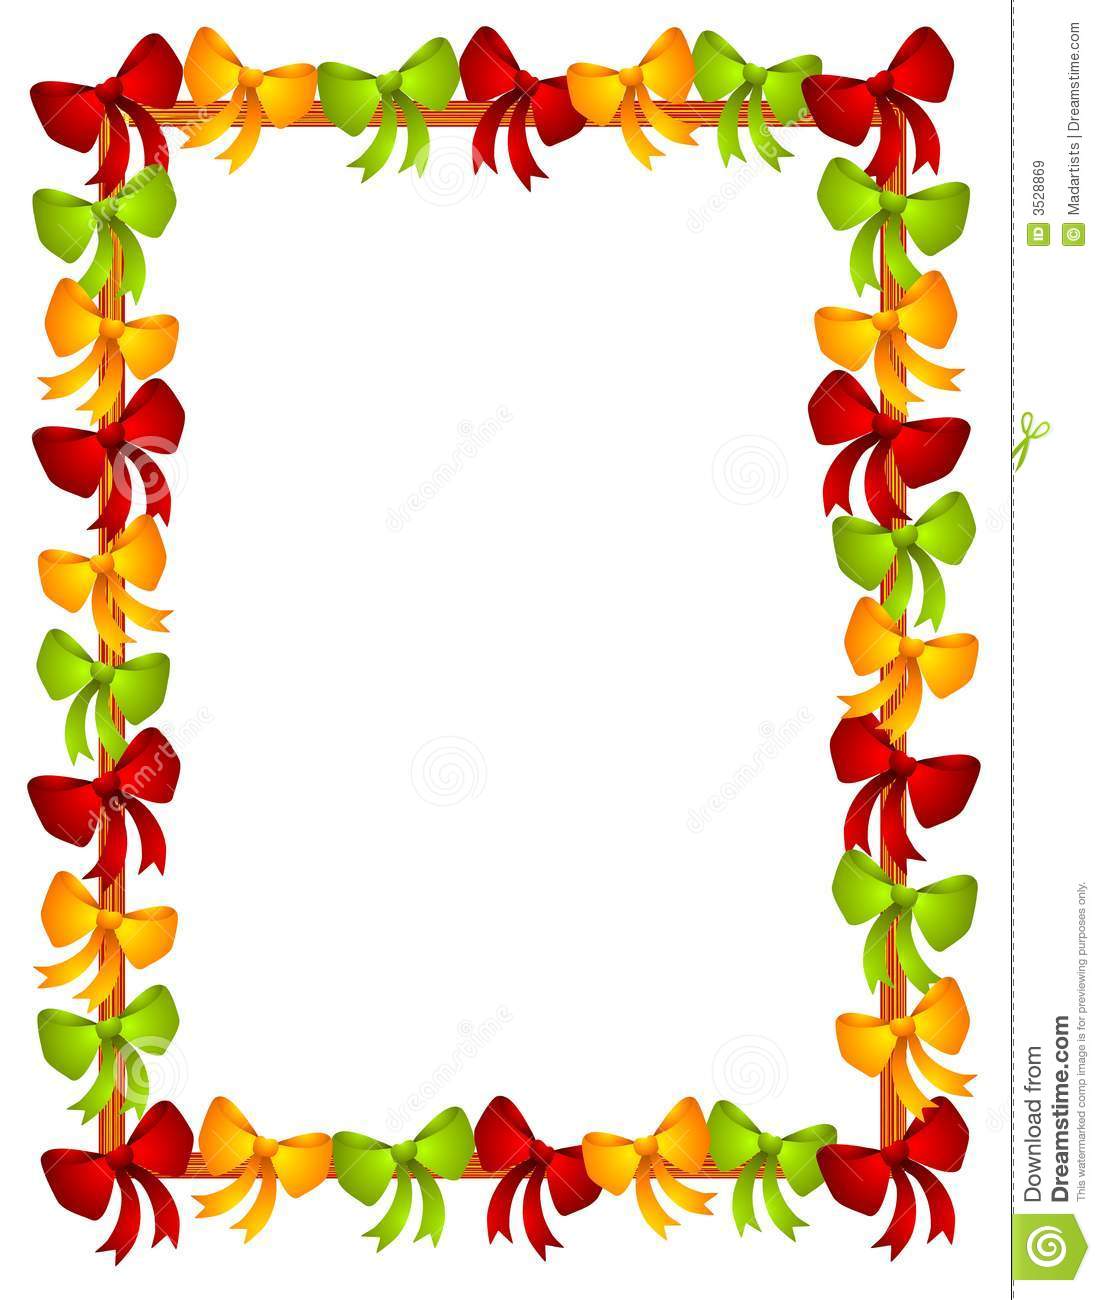 Books Borders And Frames | Clipart Panda - Free Clipart Images